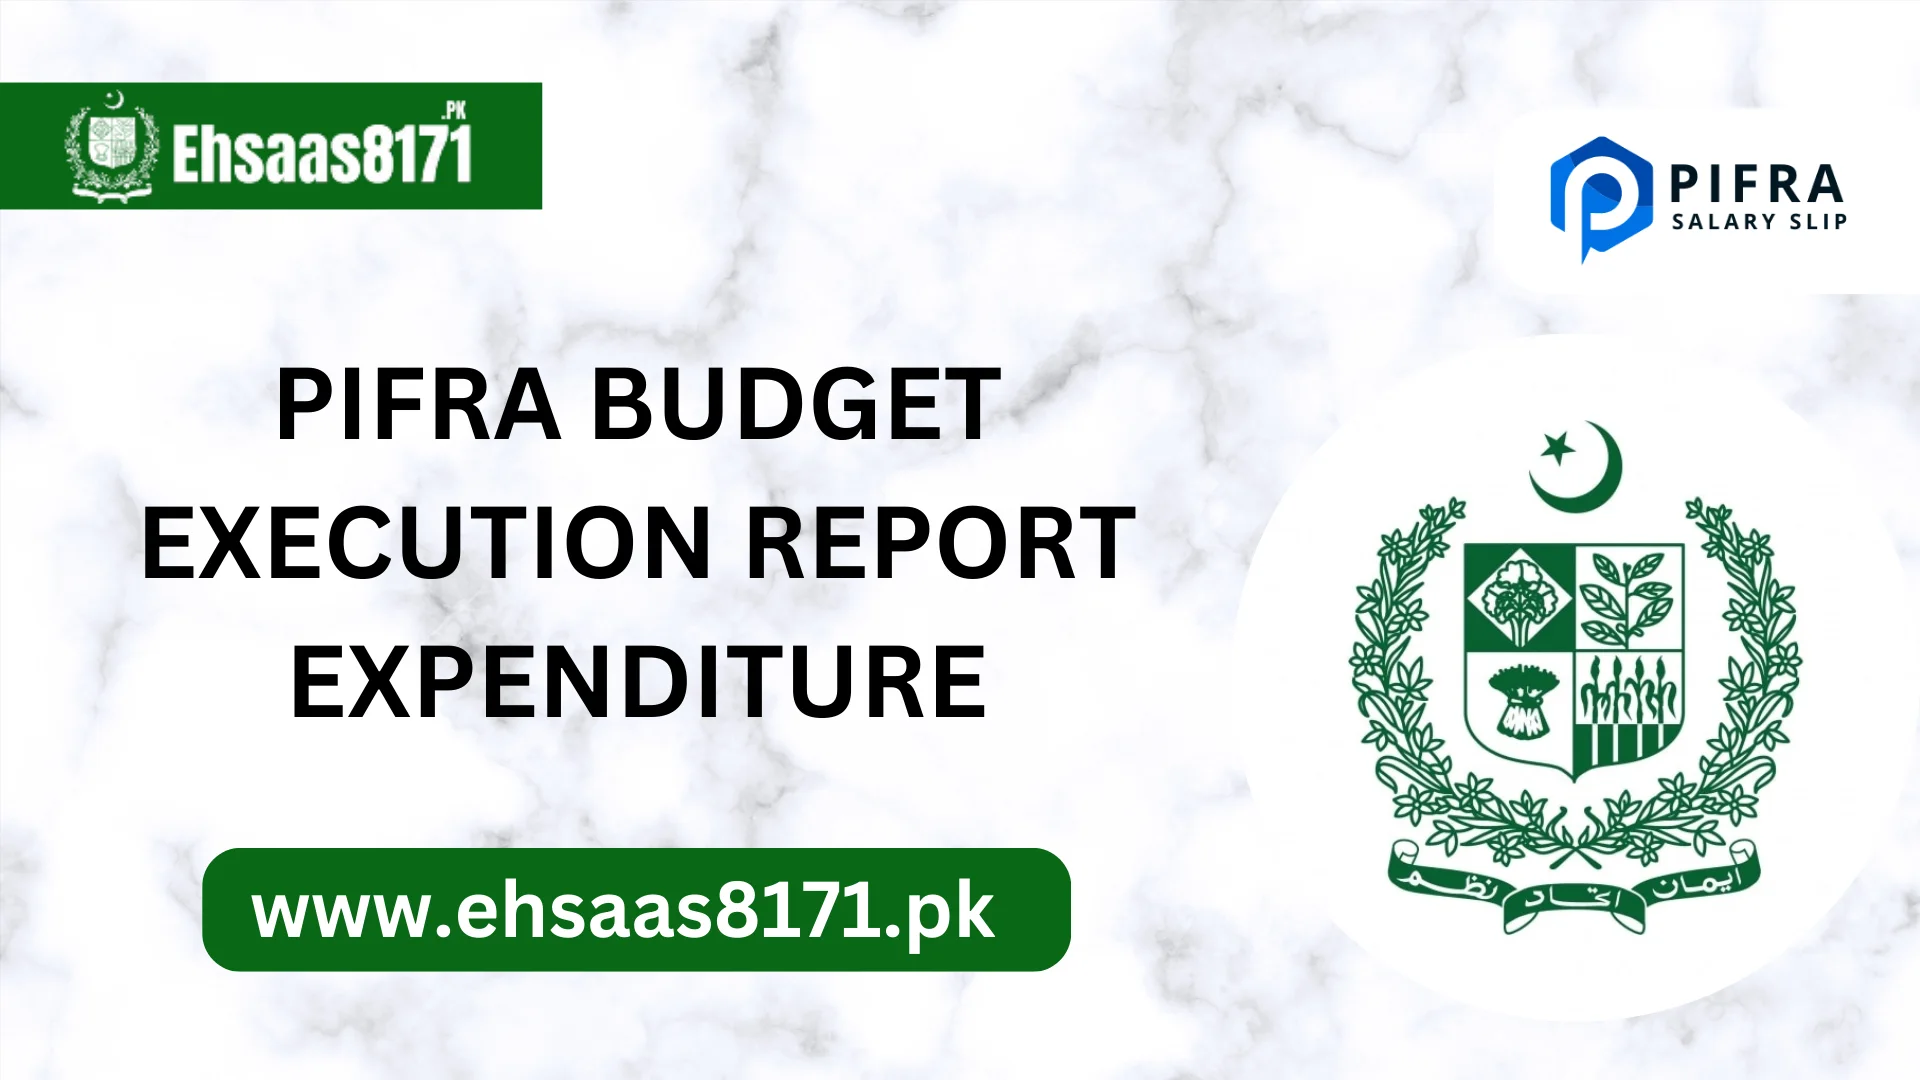 PIFRA Budget Execution Report Expenditure